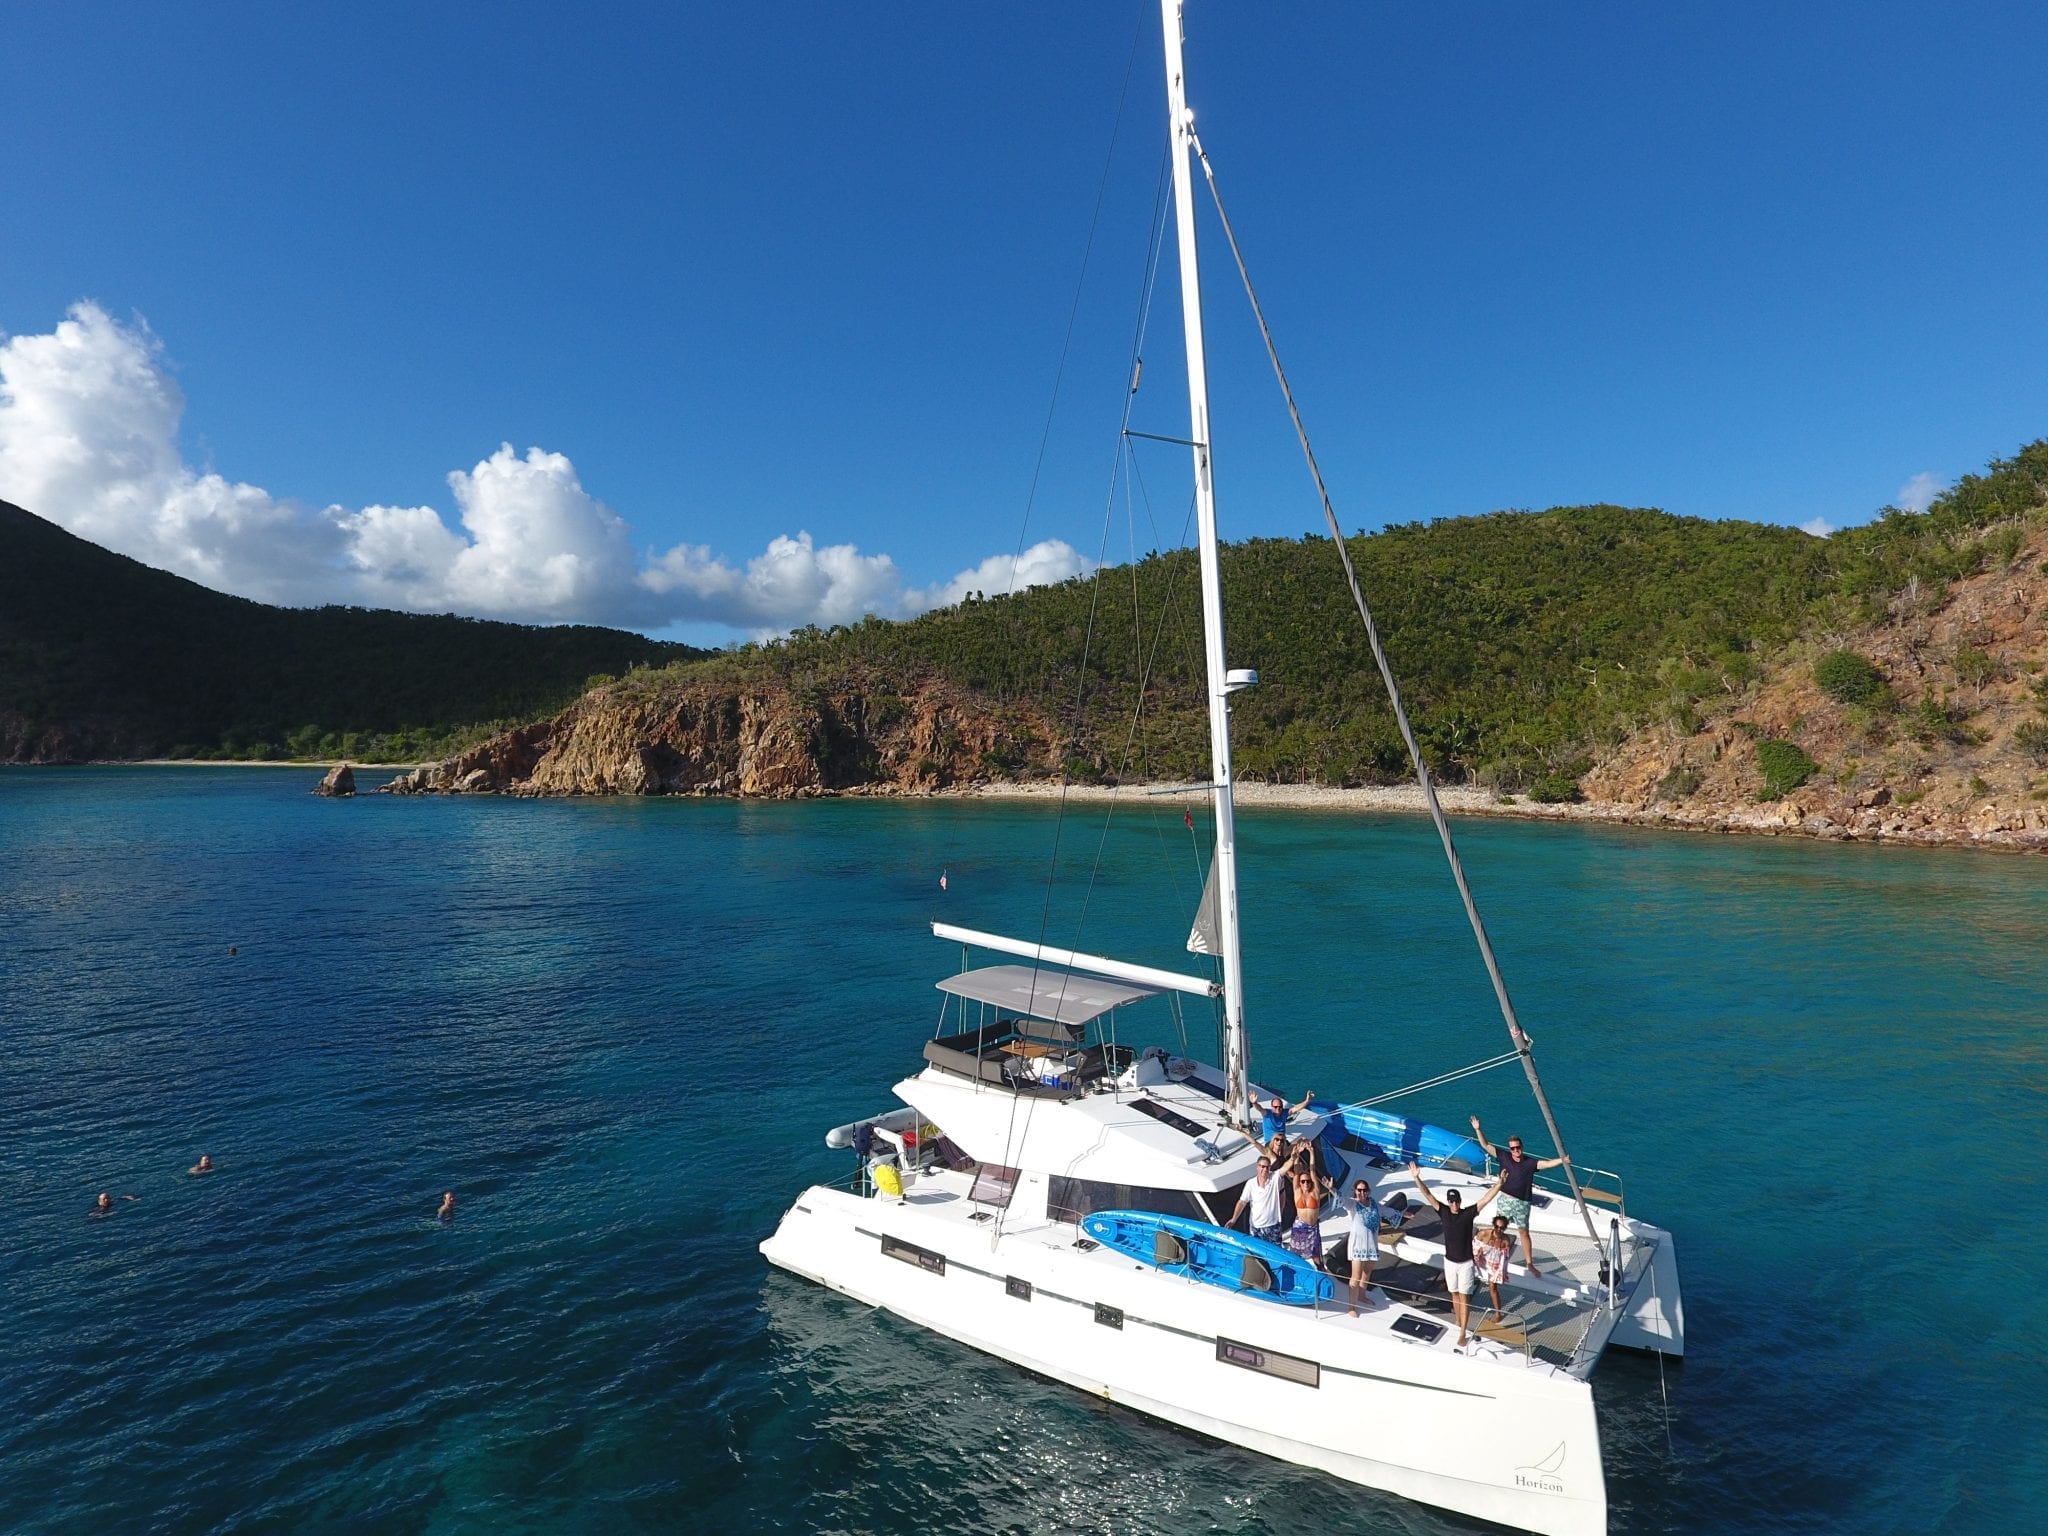 bvi yacht charters cost